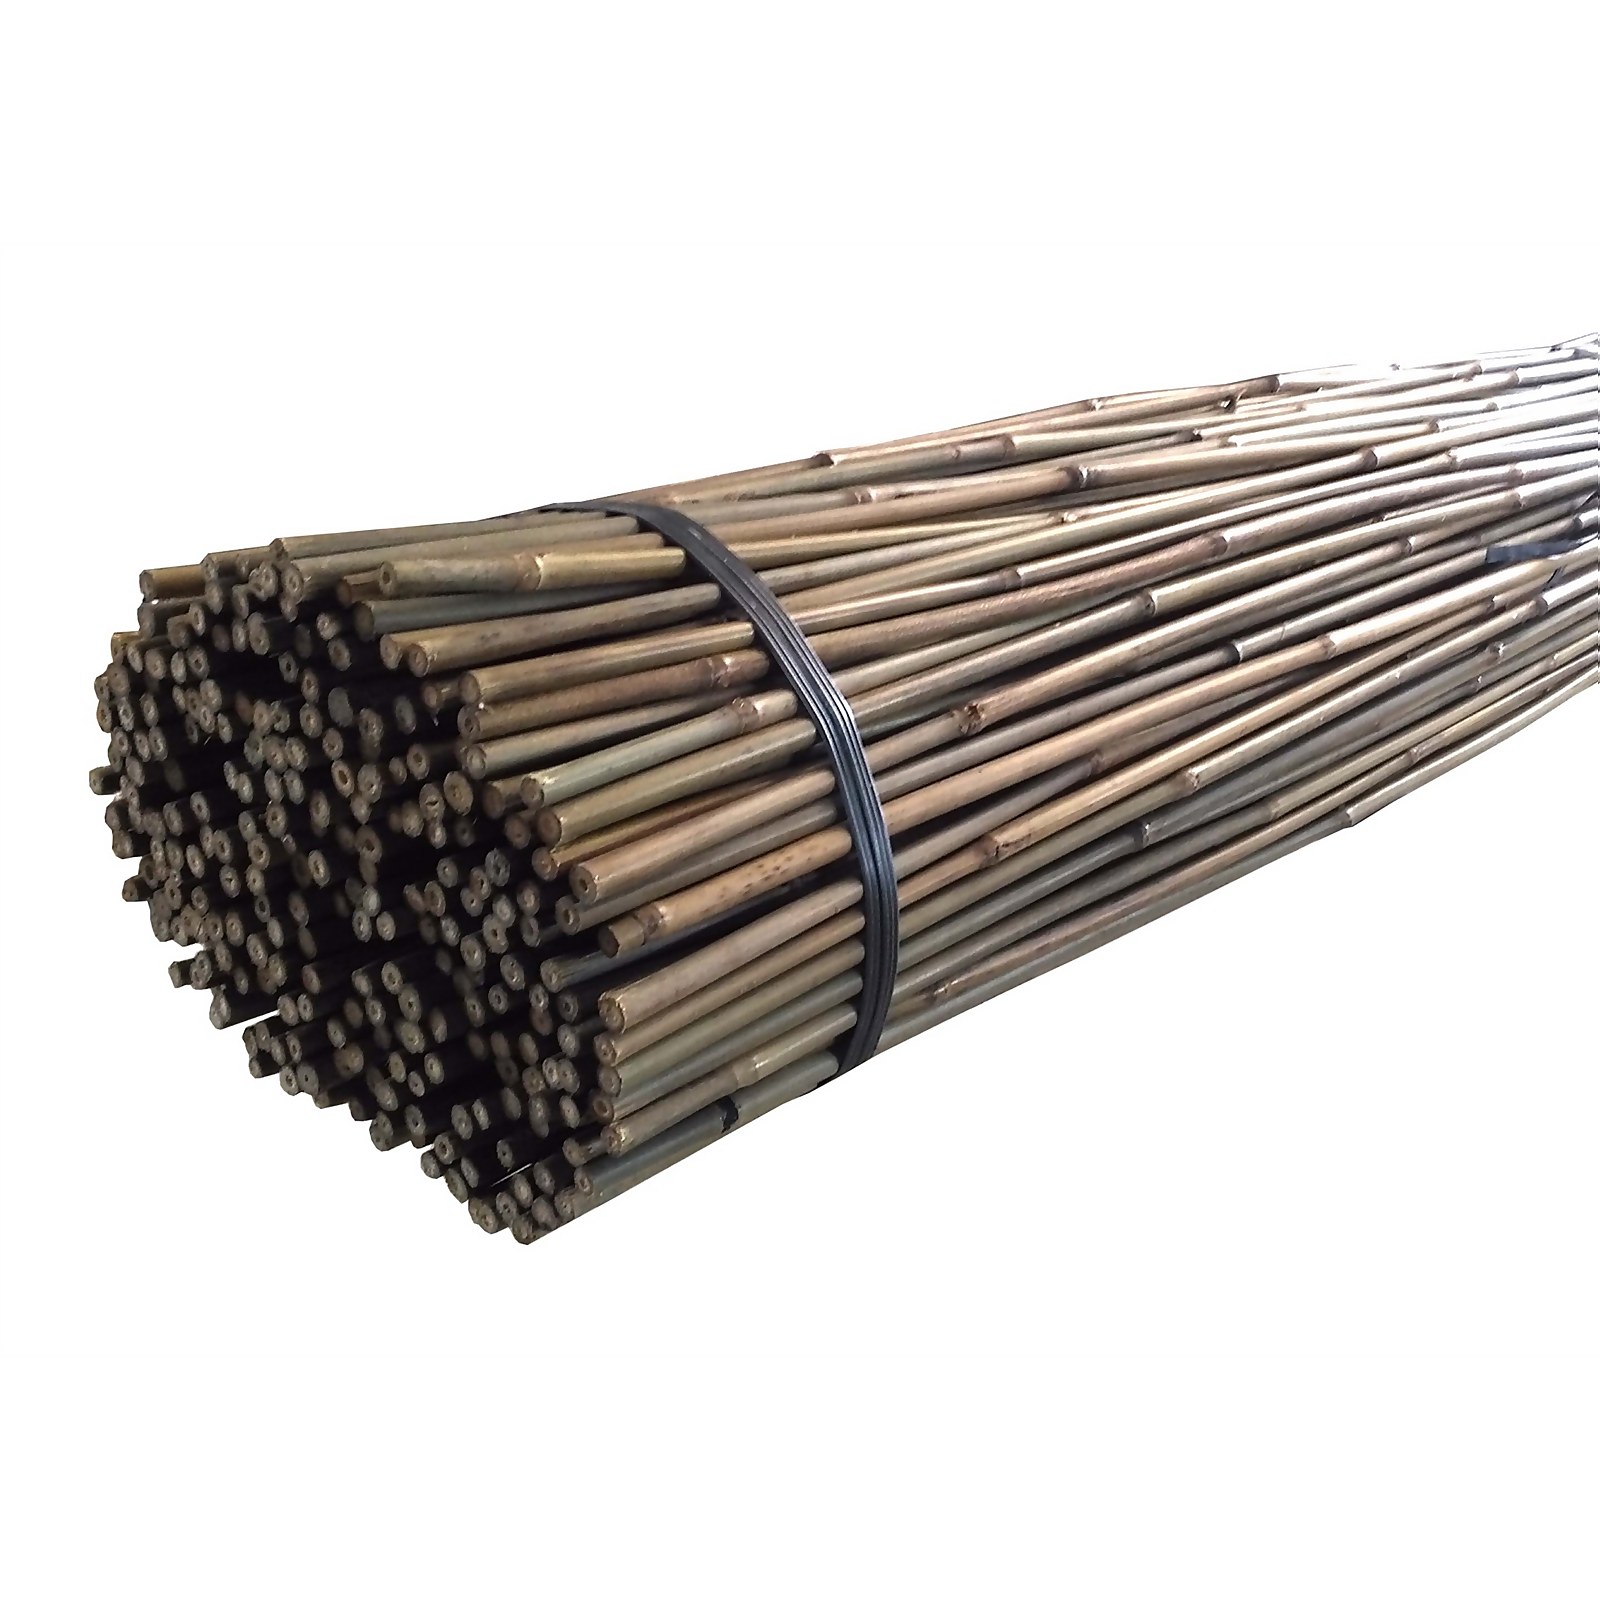 Photo of 10 Pack Bamboo Canes - 1.5m/5ft